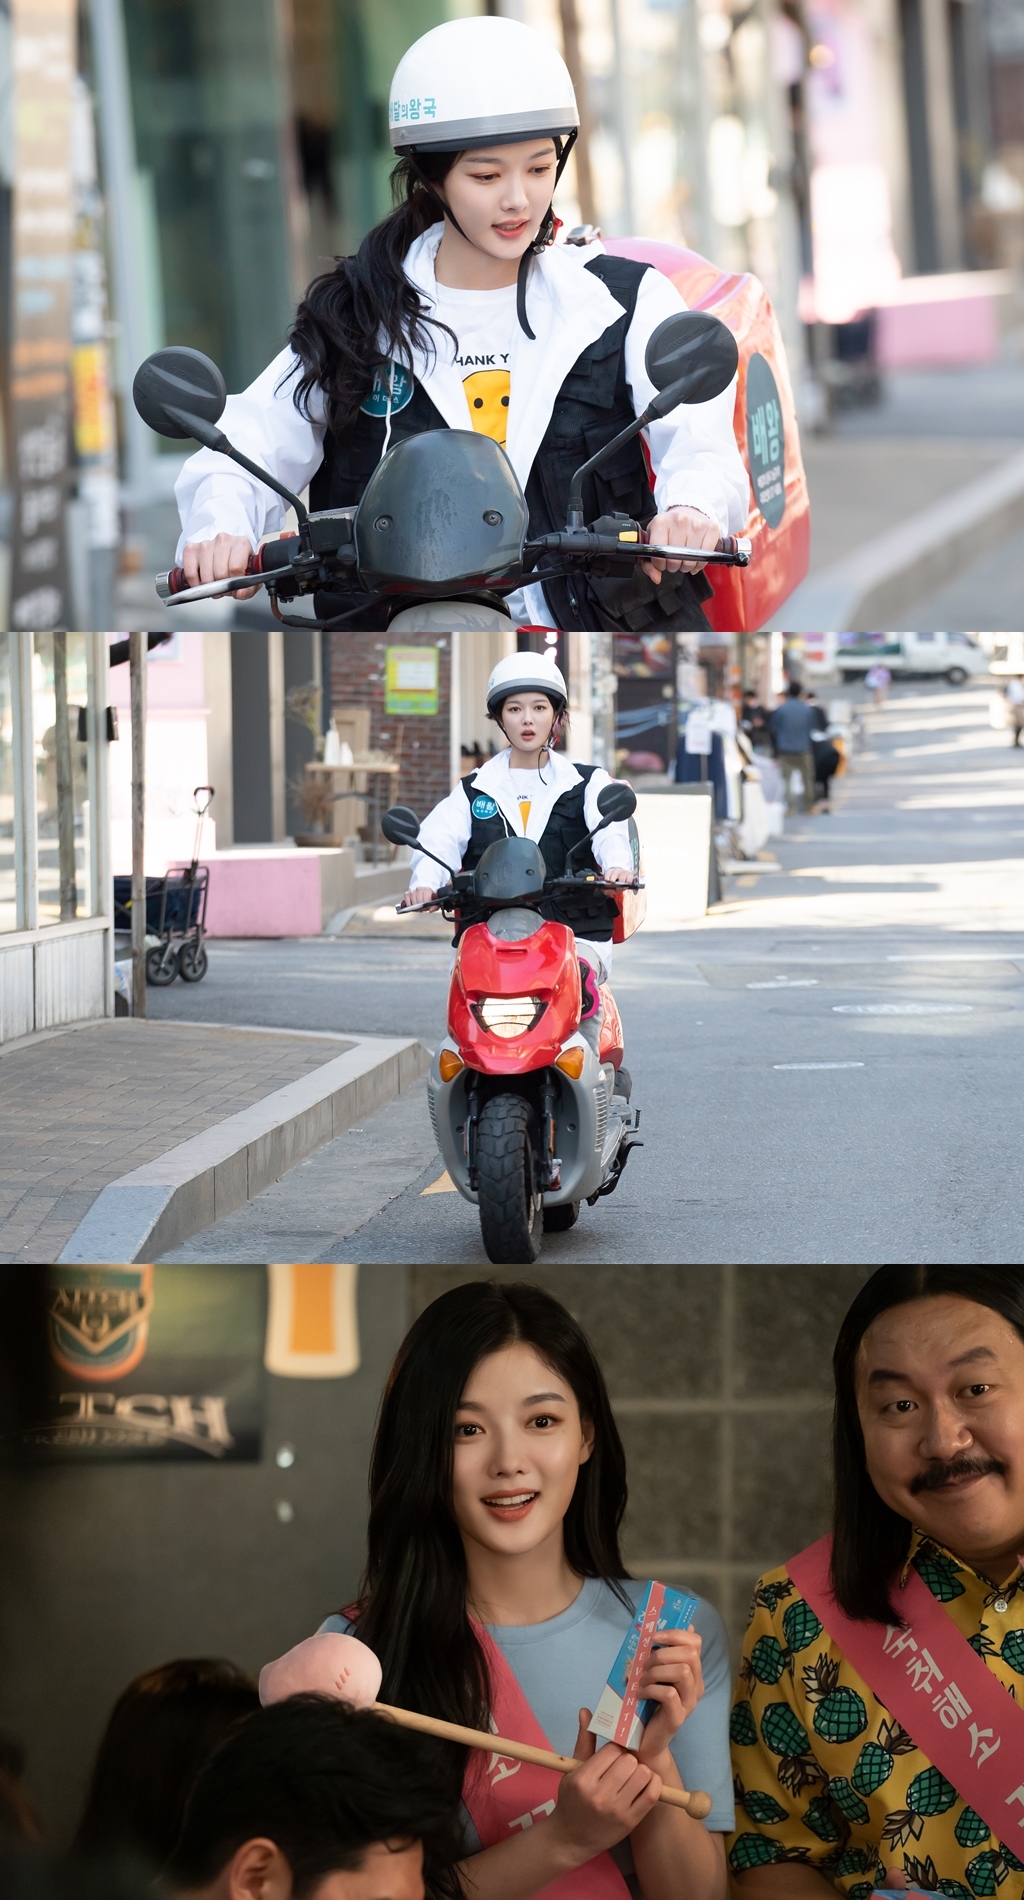 Seoul = = Convenience store morning star Kim Yoo-jung leaves Convenience store and starts delivery alba.The bomb declaration of Jeong Sae-byeol (Kim Yoo-jung), which was not even thought of by SBS gilt drama Convenience store Morning Star (playplayplay by Son Geun-joo/director Lee Myung-woo), which is being broadcast every week, raised questions for the next story.The ending of the sixth round was finished with the star saying I will quit the Convenience store to Choi Dae-heon (Ji Chang-wook).In fact, the star was leaving the Convenience store for Choi Dae-heon.The star still likes Choi Dae-heon, but he did not want Choi Dae-heon to be hard because of his heart.I know how much the star likes Choi Dae-heon and I know the star that was full of affection for the Convenience store so that I can say I just feel good when Im on the counter.In the 7th scene released by the production team of Convenience store morning star on the 9th, attention is focused on the appearance of the star who started a new Alba leaving the Convenience store.In the open photo, the star is wearing a delivery rider, not a blue Convenience store vest that was always worn.The star, which makes everything hard, drives a delivery bike and travels all over the neighborhood, but delivery Alba is saddened by the tired appearance of the star.Its not the end of the story. The star is spending twenty-four hours at night, running to promotional alba.I am having a busy day doing Alba without rest than when I was in the Convenience store.What happened to the star who left the Convenience store?In addition, the interest of viewers is increasing whether the star is really leaving Choi Dae-heon and Convenience store.In the 7th preliminary video, it was filled with a picture of a devastated star as if he had been fraudulent in real estate, and he guessed that a stormy incident occurred to the star.In addition, Choi Dae-heon is expected to be seen in the Convenience store, and it is raising the question of why the star who quit Alba came back to the Convenience store.The 7th Convenience store morning star will be broadcasted at 10 pm on the 10th.